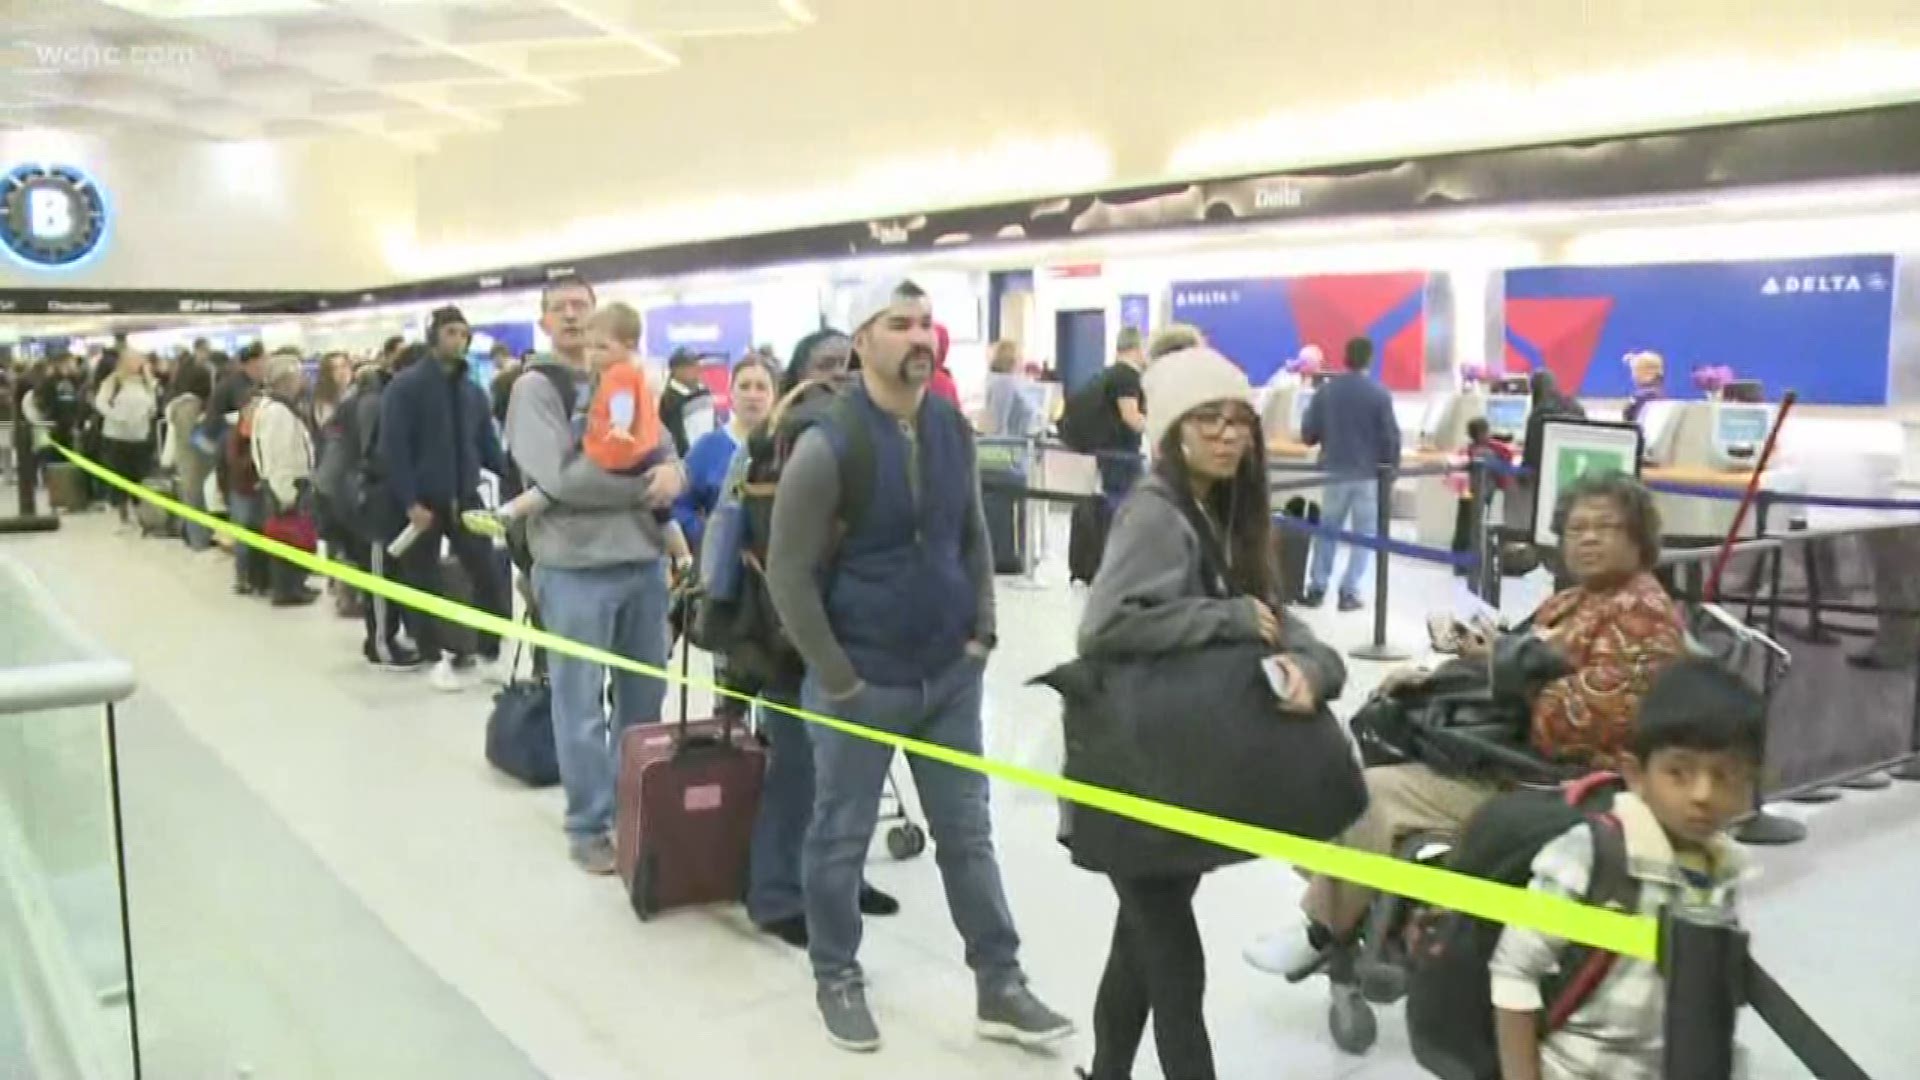 The rush is on at Charlotte Douglas, where hundreds of thousands of people are expected to pass through during Thanksgiving weekend.